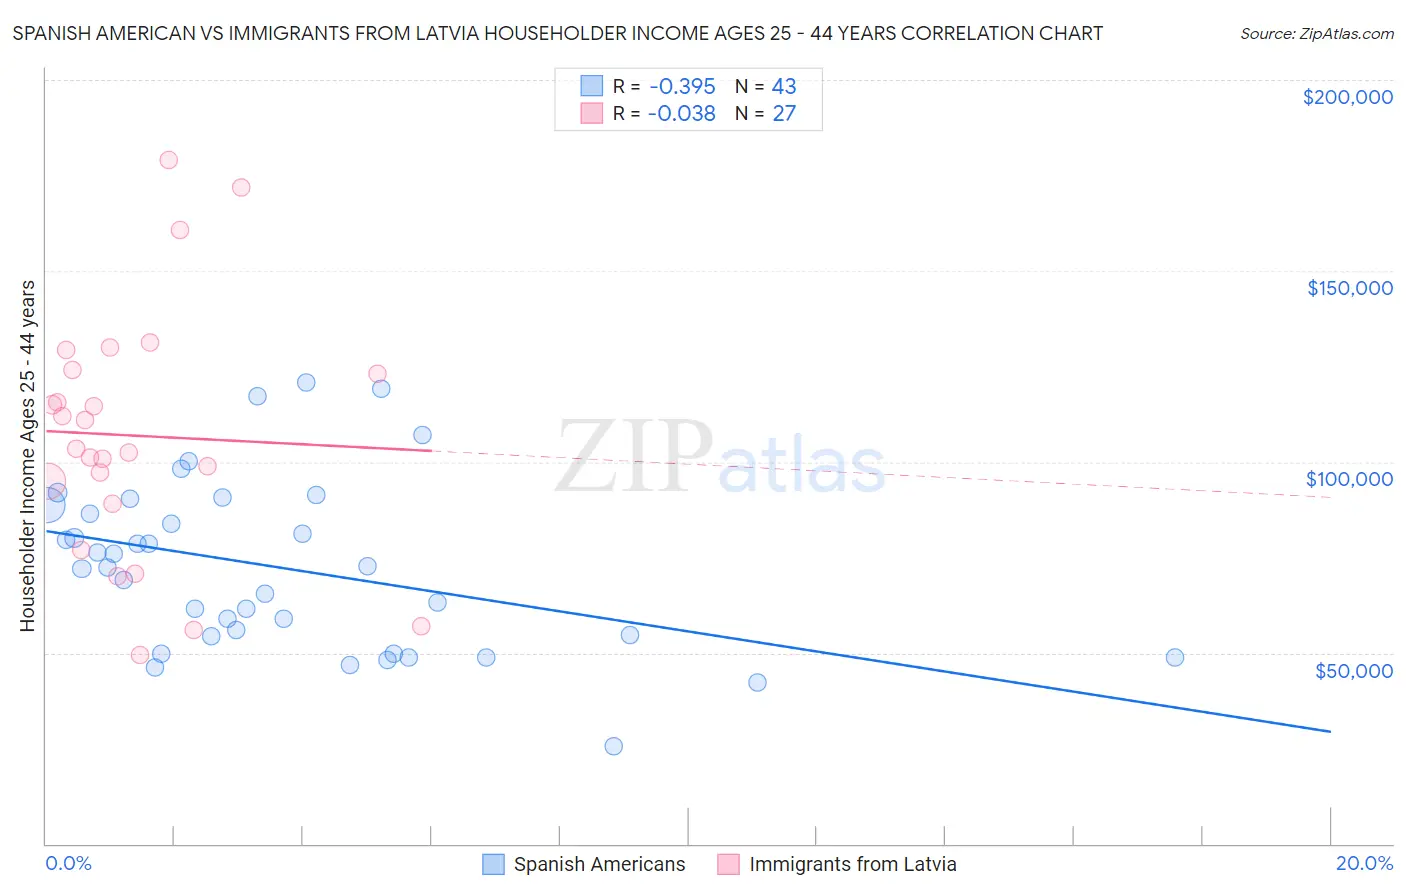 Spanish American vs Immigrants from Latvia Householder Income Ages 25 - 44 years